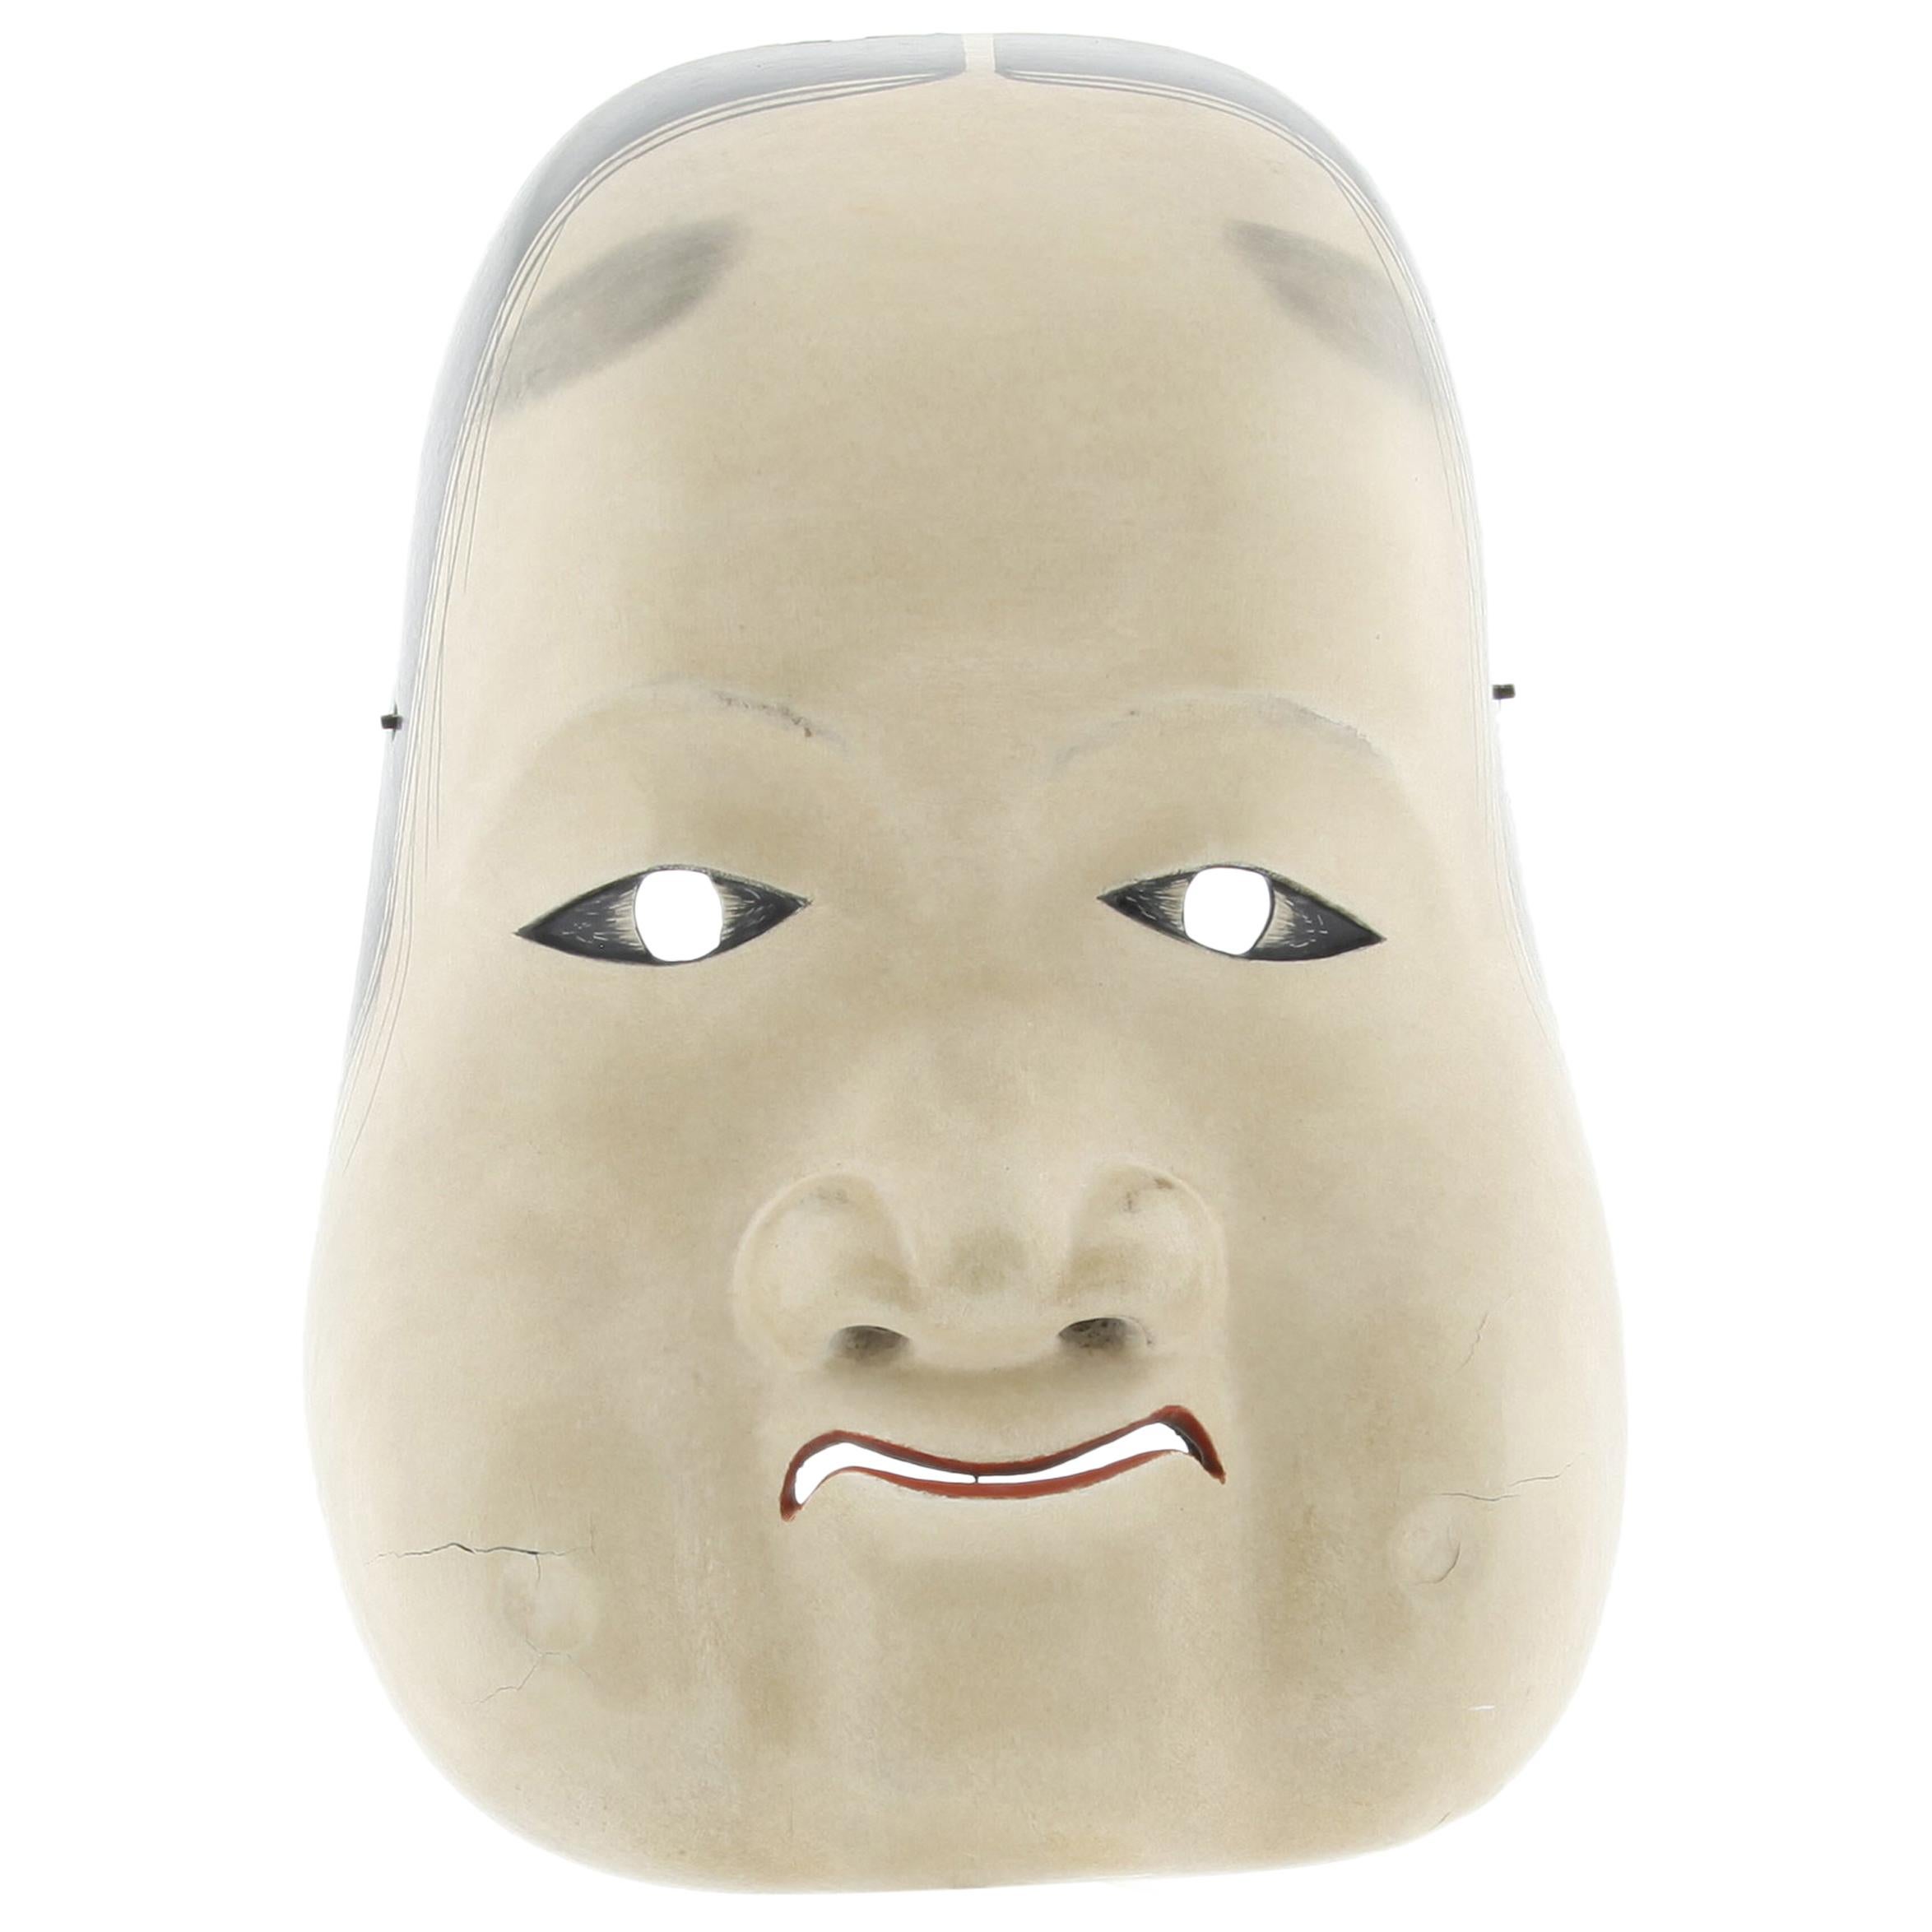 Kyogen Mask, Oto, Japanese Classical Theatre, 20th Century, Woodcraft, Handmade For Sale